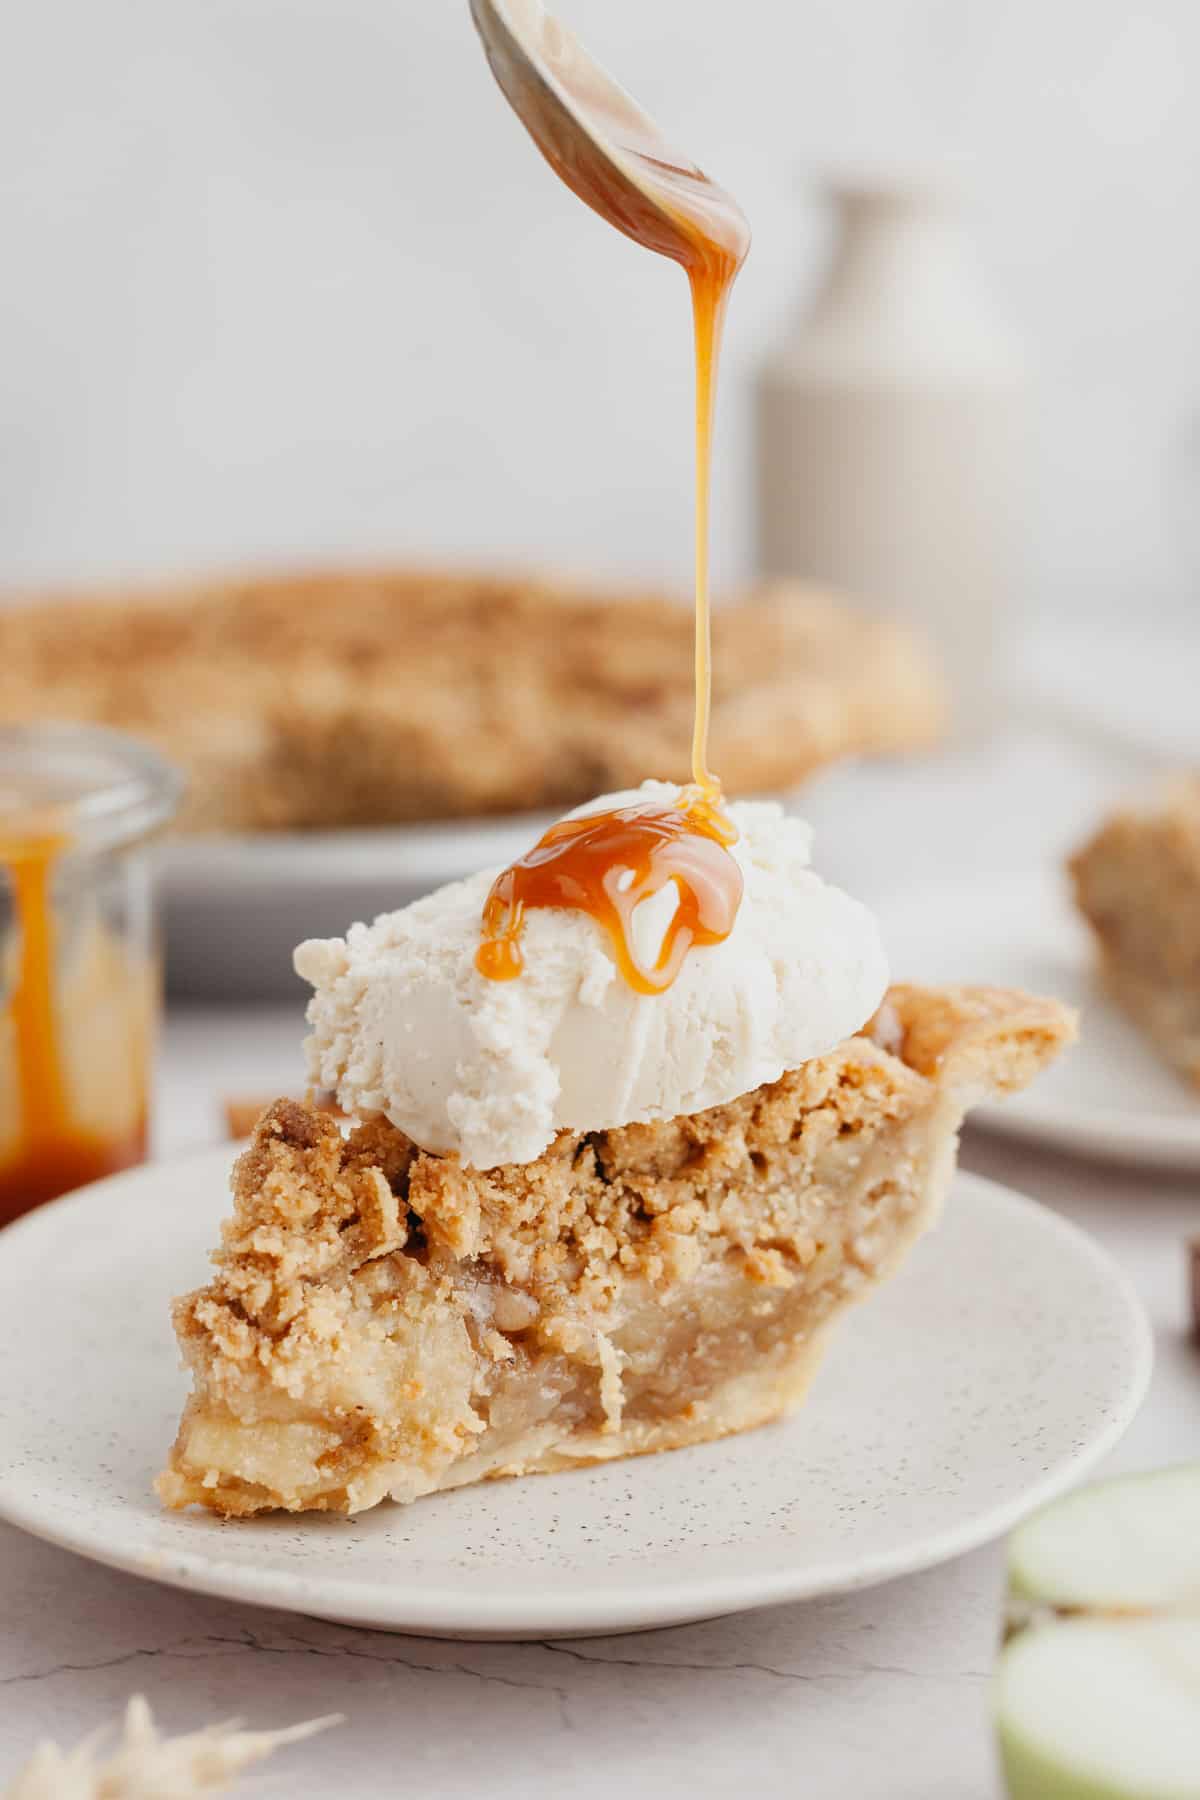 A slice of apple pie with a big scoop of vanilla ice cream on top and caramel sauce.